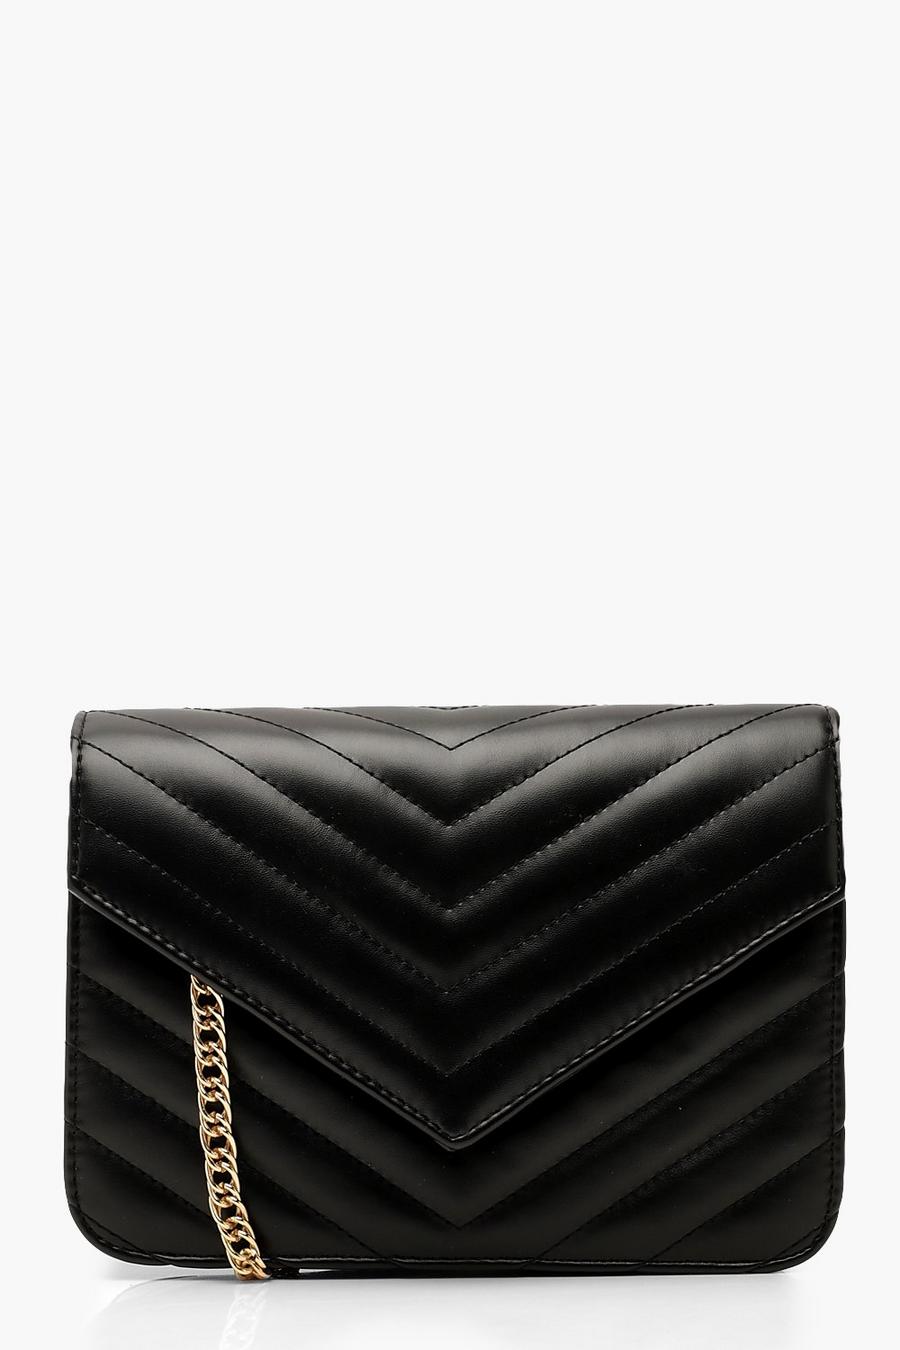 boohoo Quilted Cross Body Bag - Black - One Size